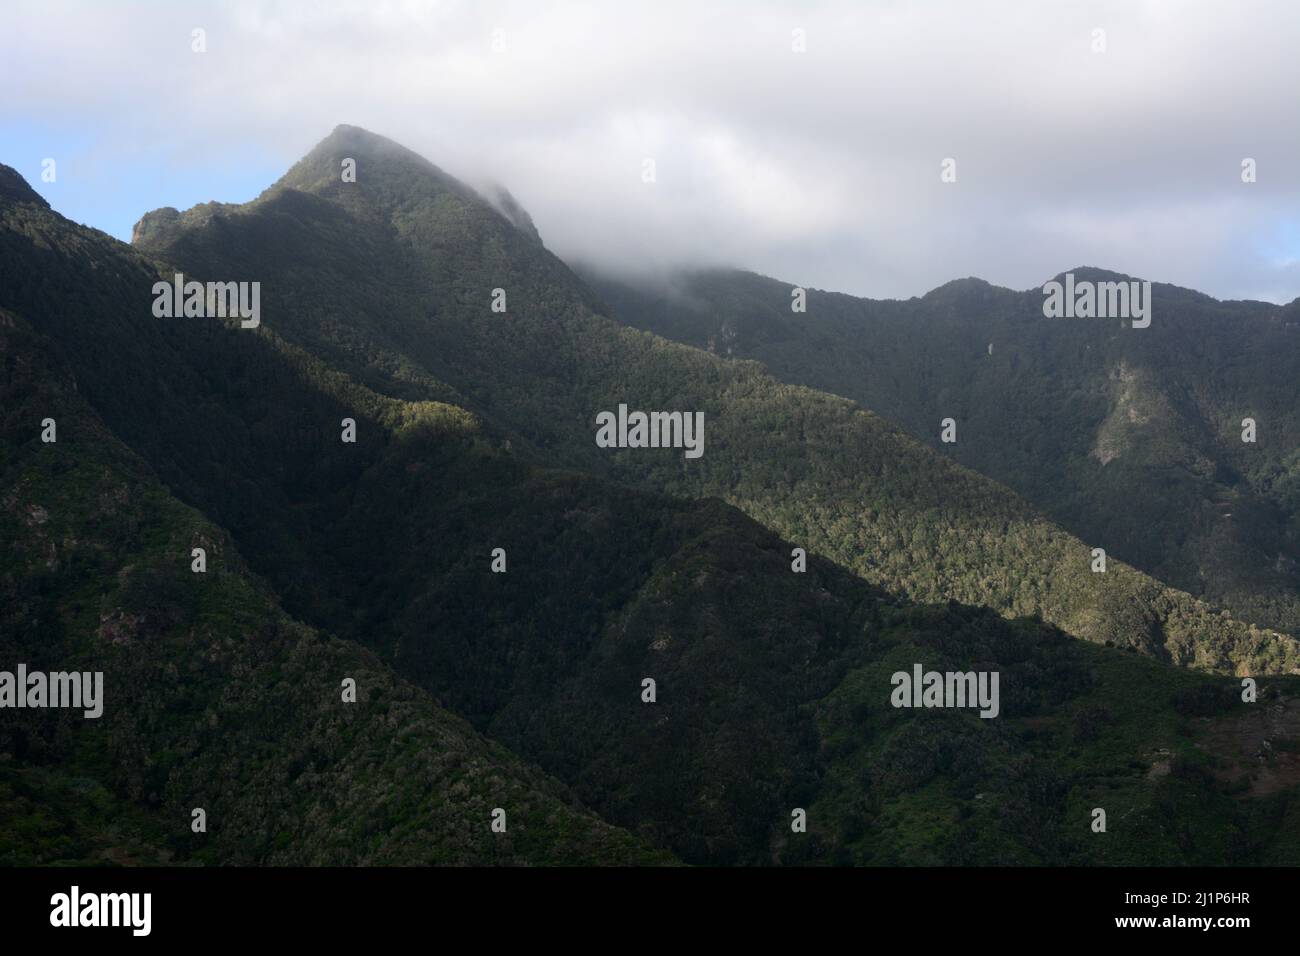 Anaga Rural Park and the Anaga Mountains above the Atlantic Ocean near Taganana, on the north coast of the island of Tenerife, Canary Islands, Spain. Stock Photo